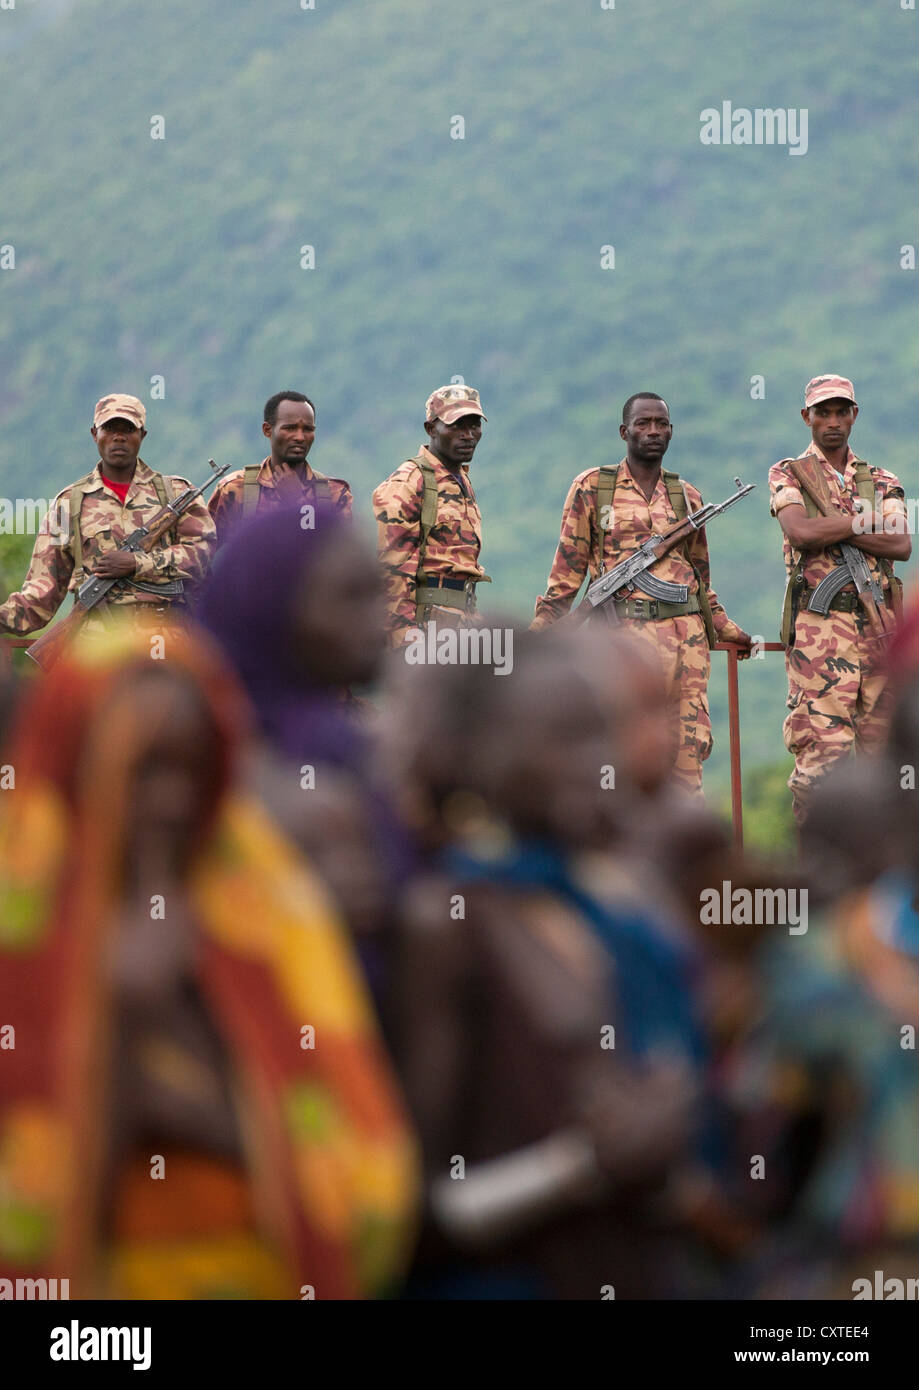 Ethiopian Army Monitoring Suri People During A Ceremony Organized By The Government, Kibish, Omo Valley, Ethiopia Stock Photo